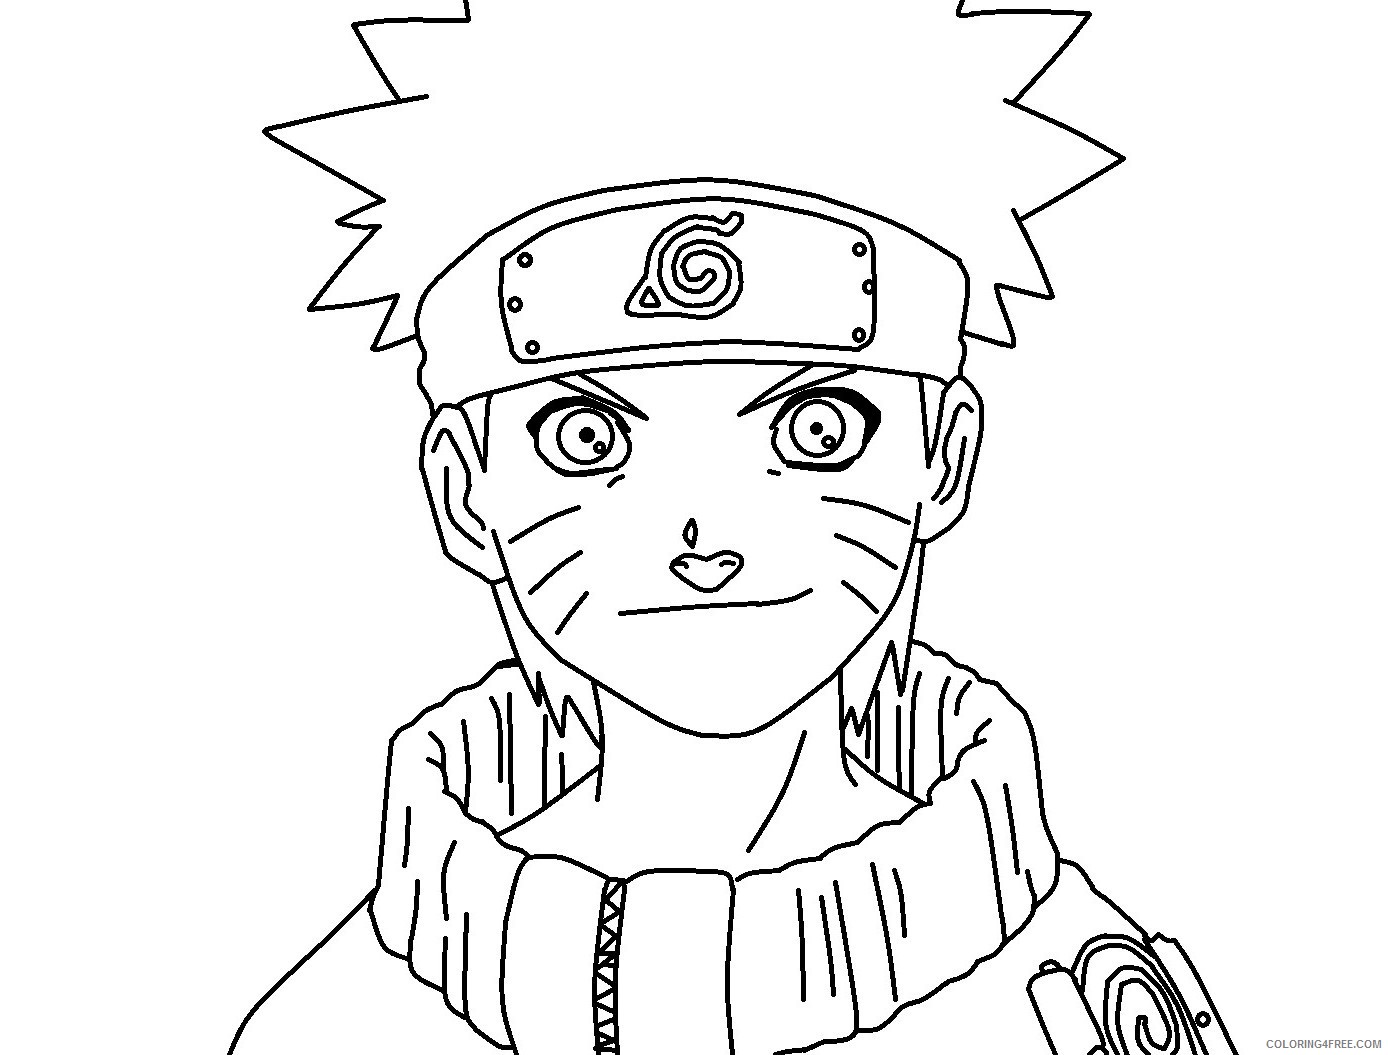 naruto coloring pages kids Coloring4free